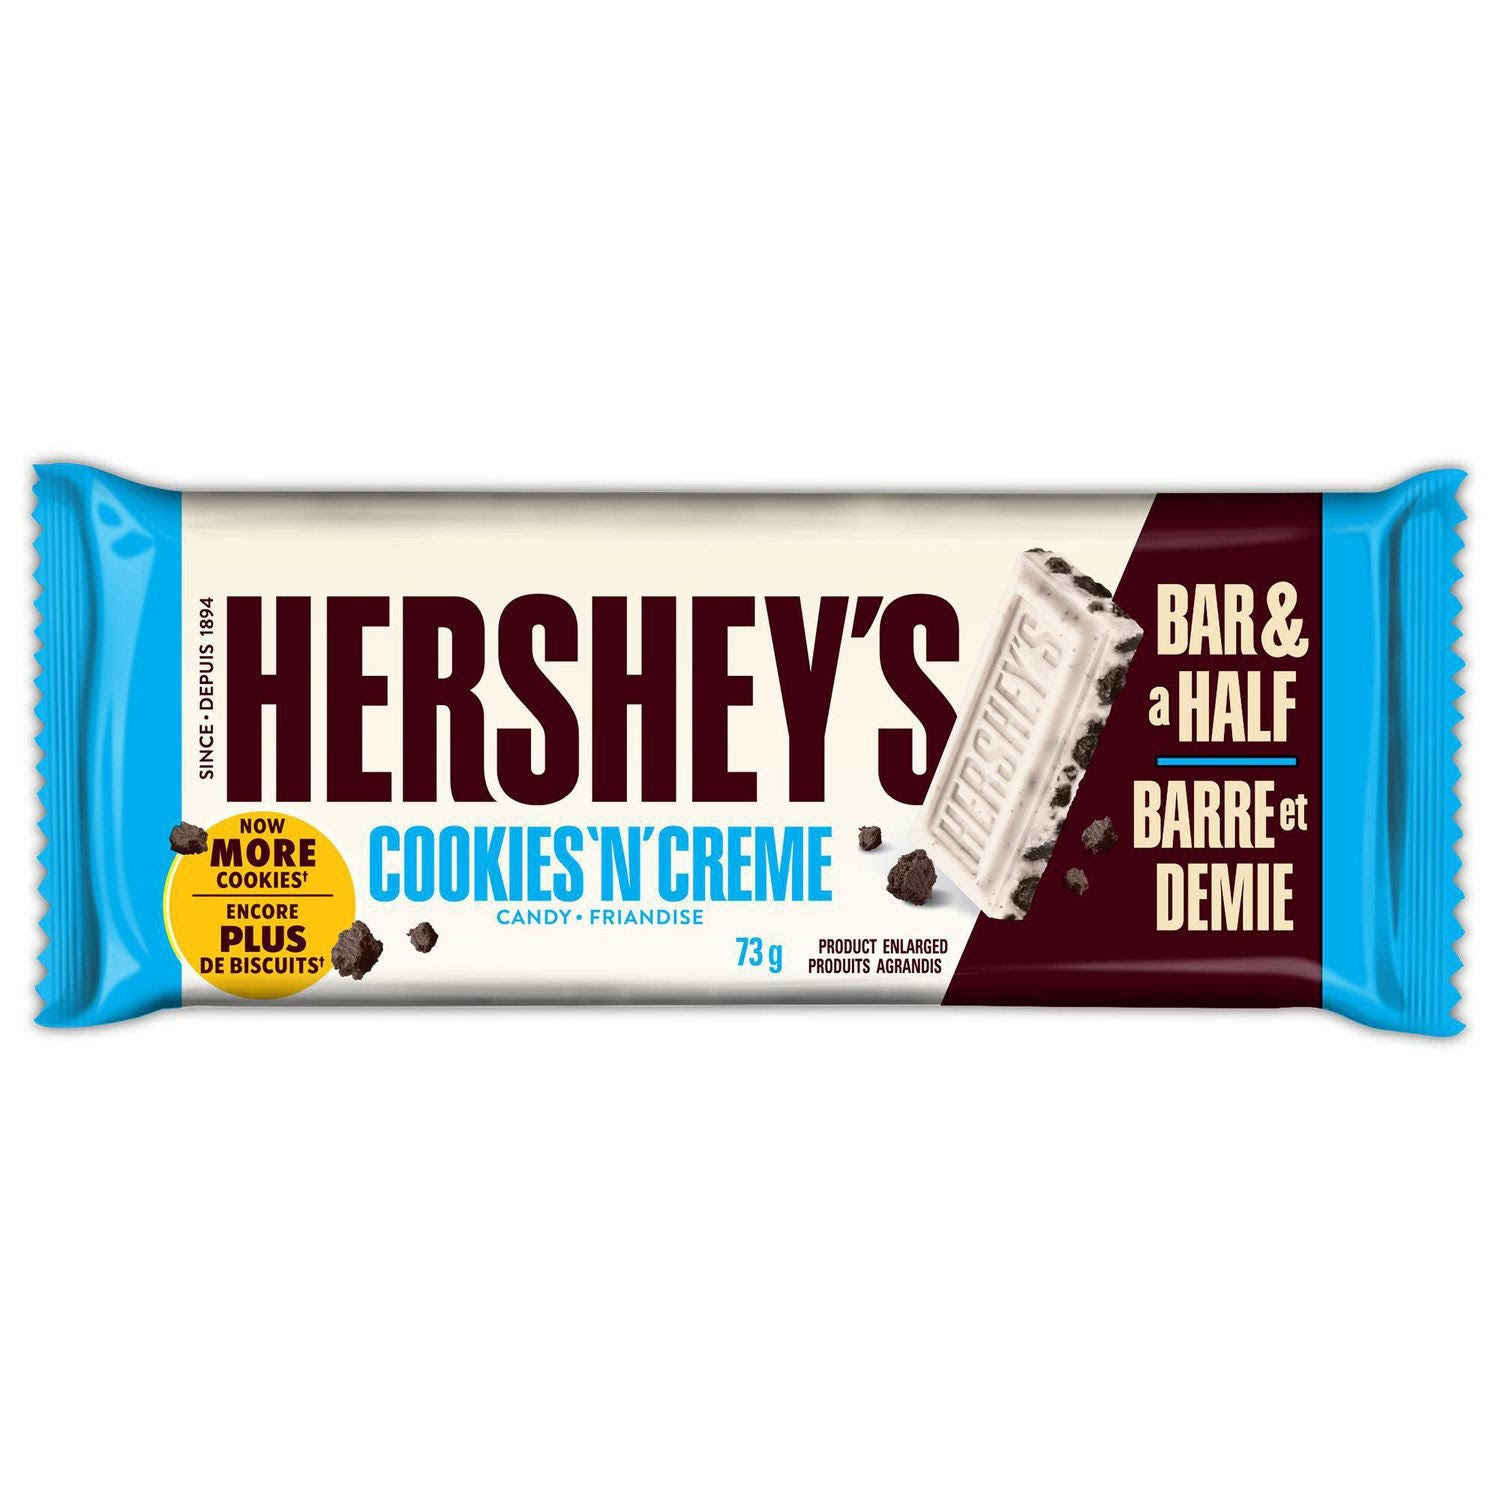 Hershey's King Size Cookies 'n' Creme Candy Bar - 73 g